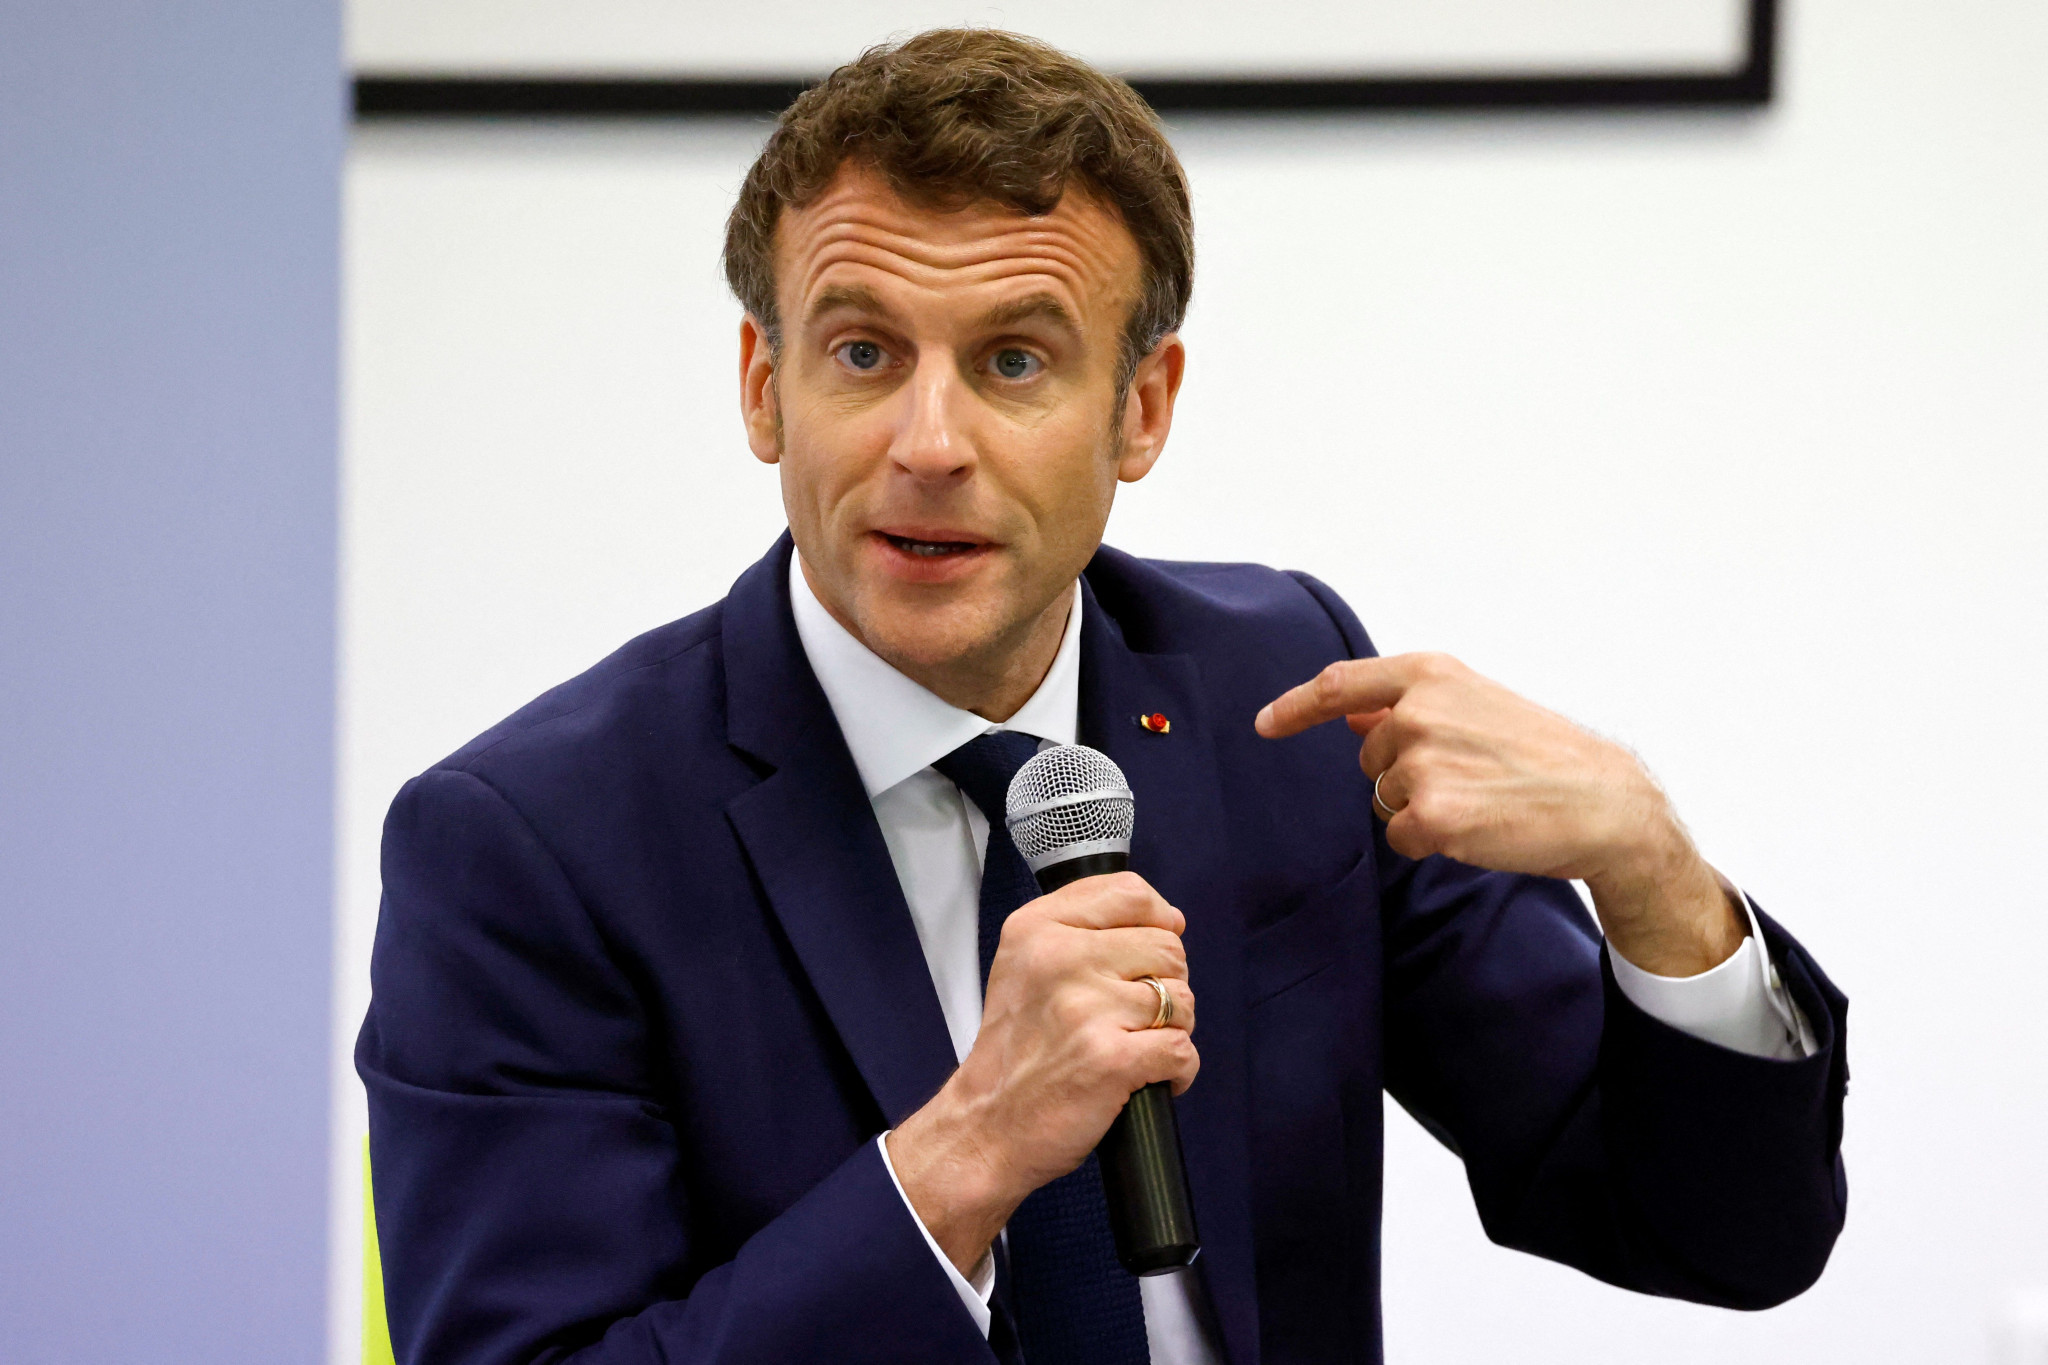 Emmanuel Macron has stated that "sport should not be politicised" ©Getty Images